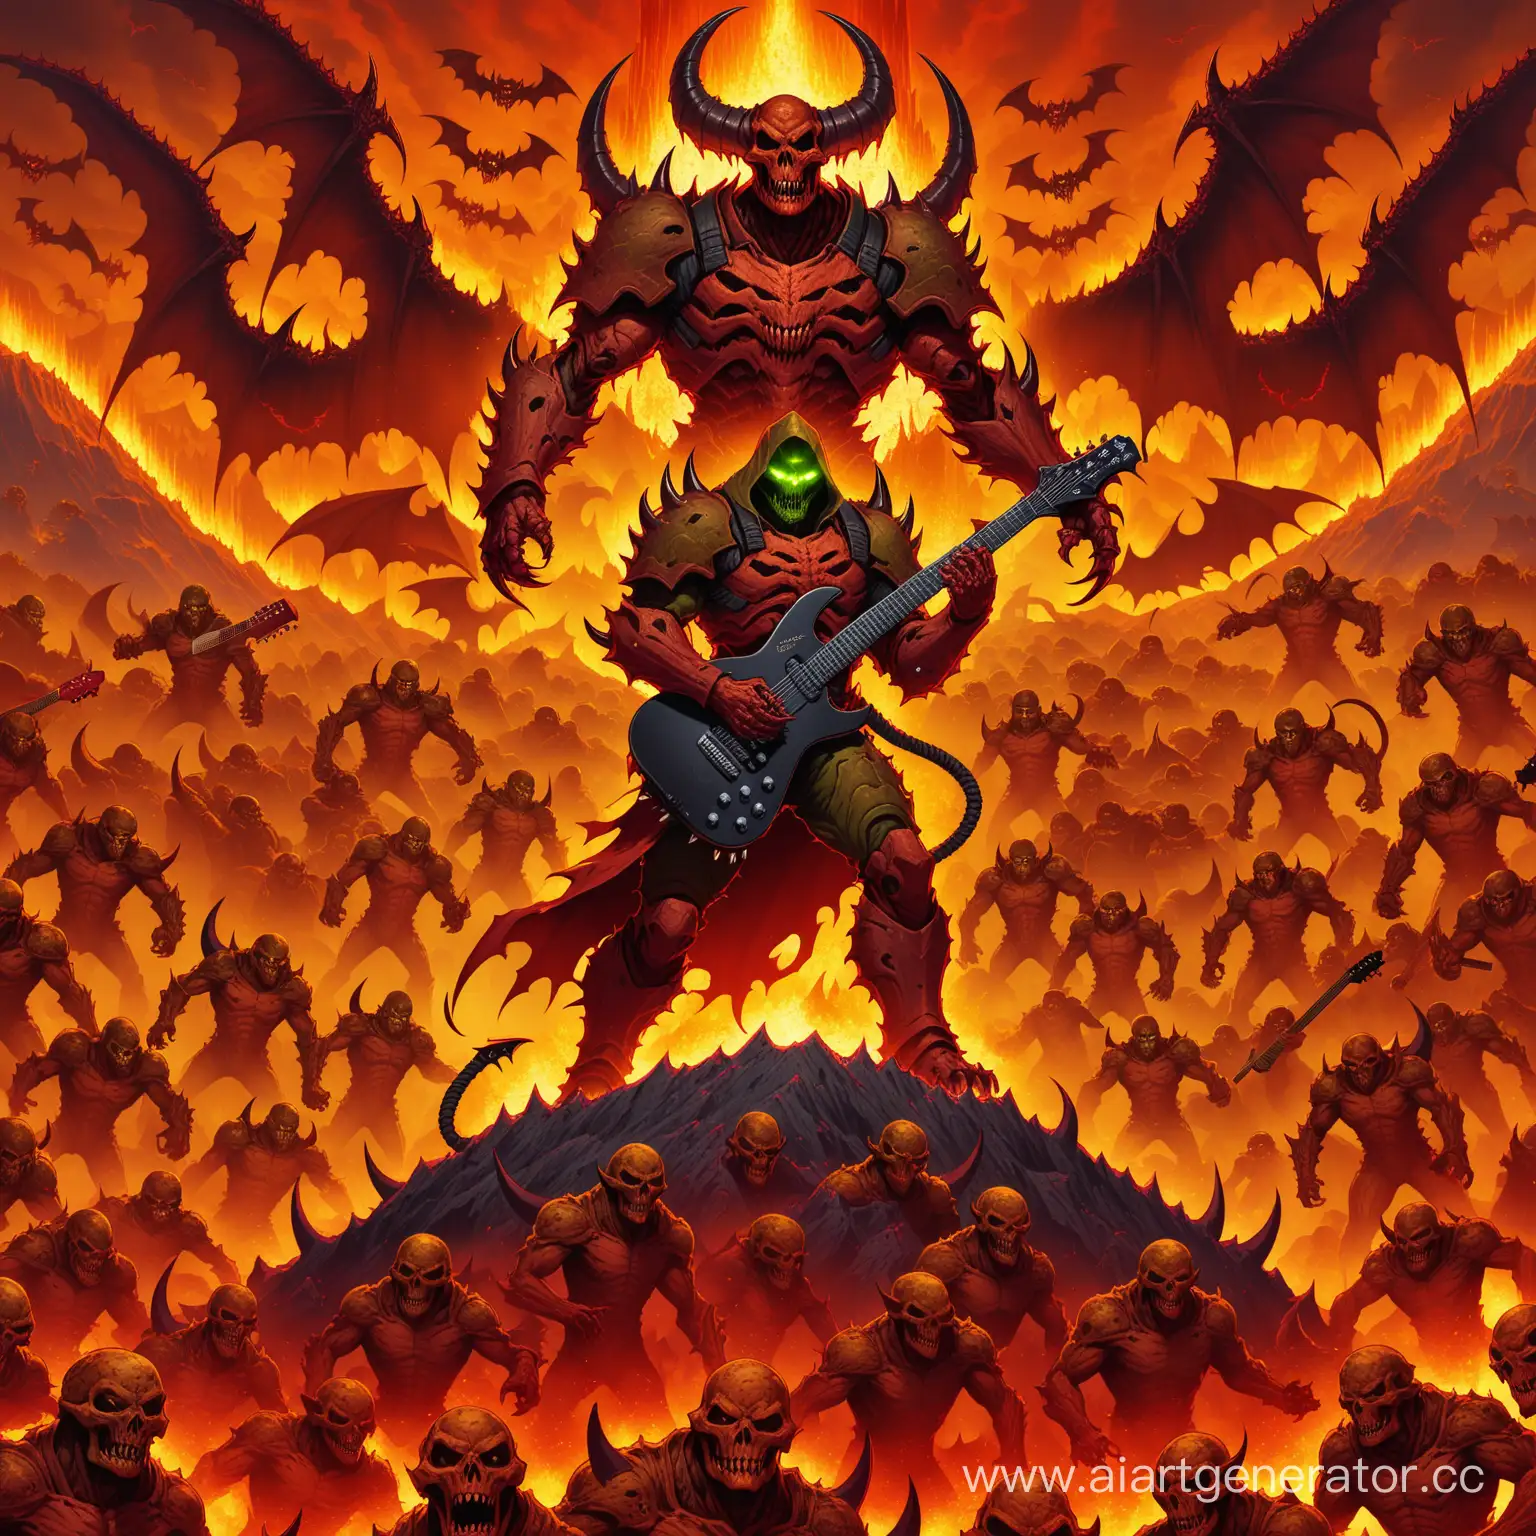 Doom slayer stands on a mountain of demon corpses and plays a demonic electronic guitar